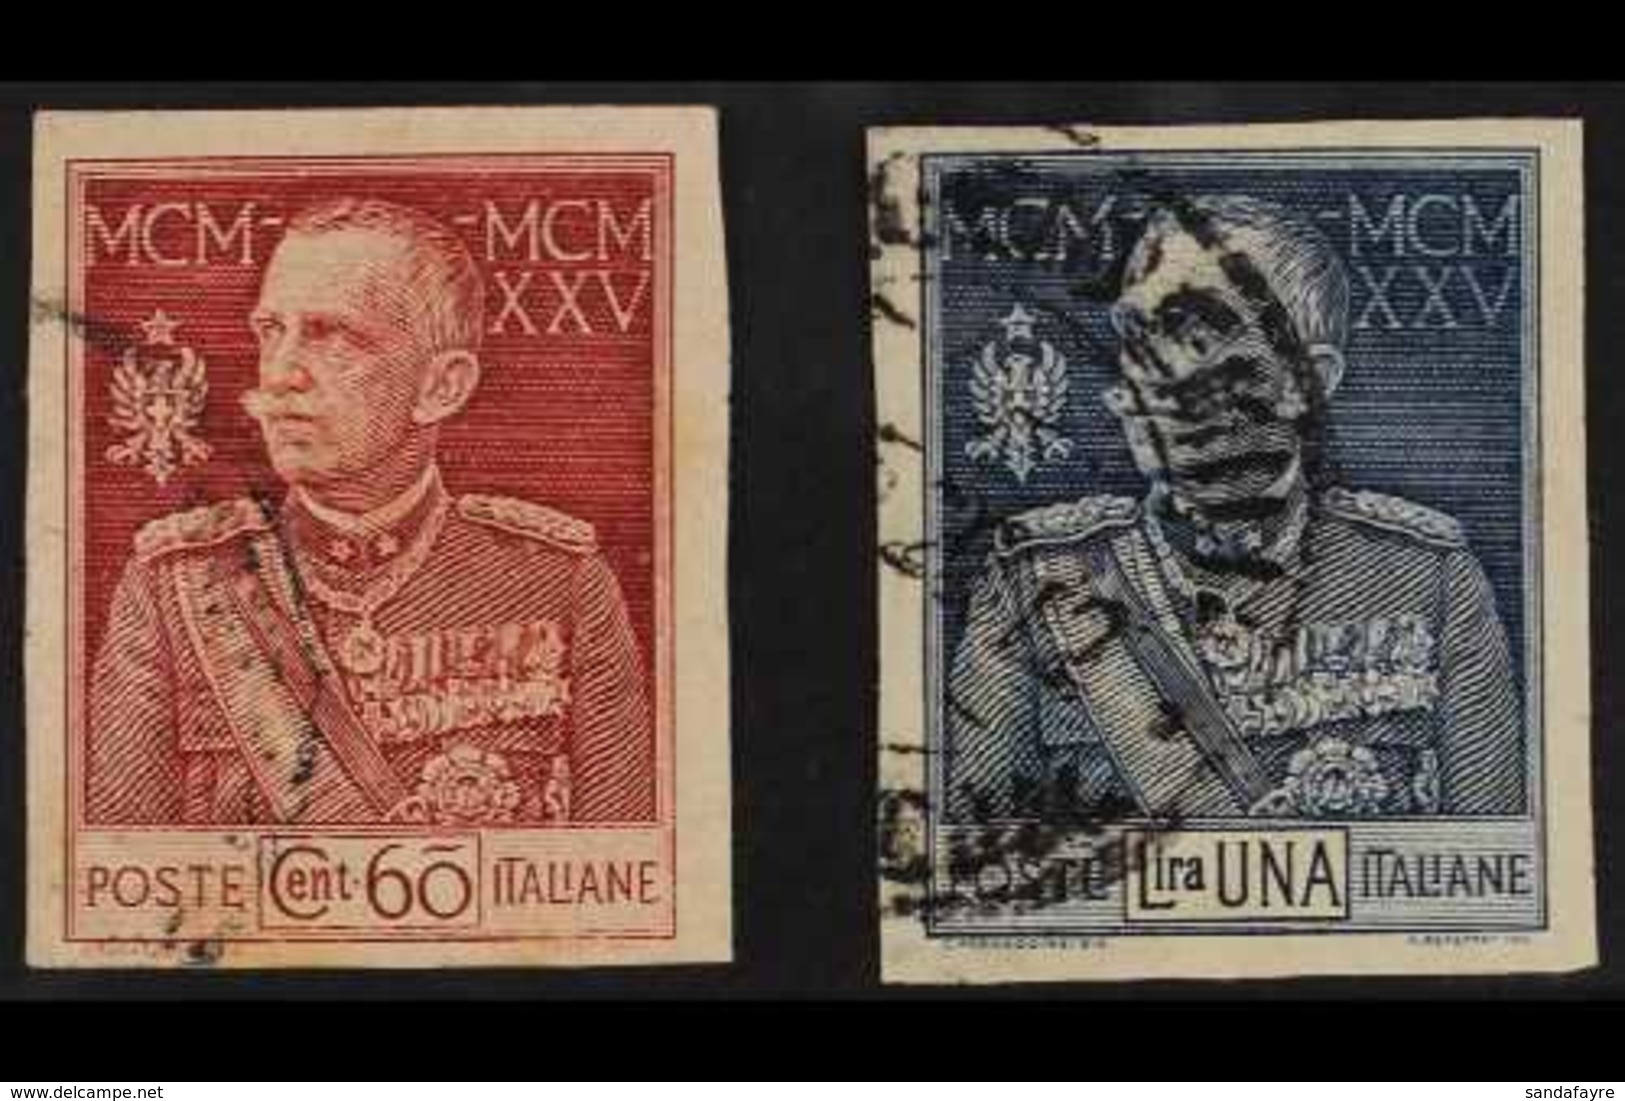 1925 60c Carmine And 1L Blue King's 25th Anniversary, Variety "imperf", Sass 186e/187e, Very Fine Used. (2 Stamps) For M - Unclassified